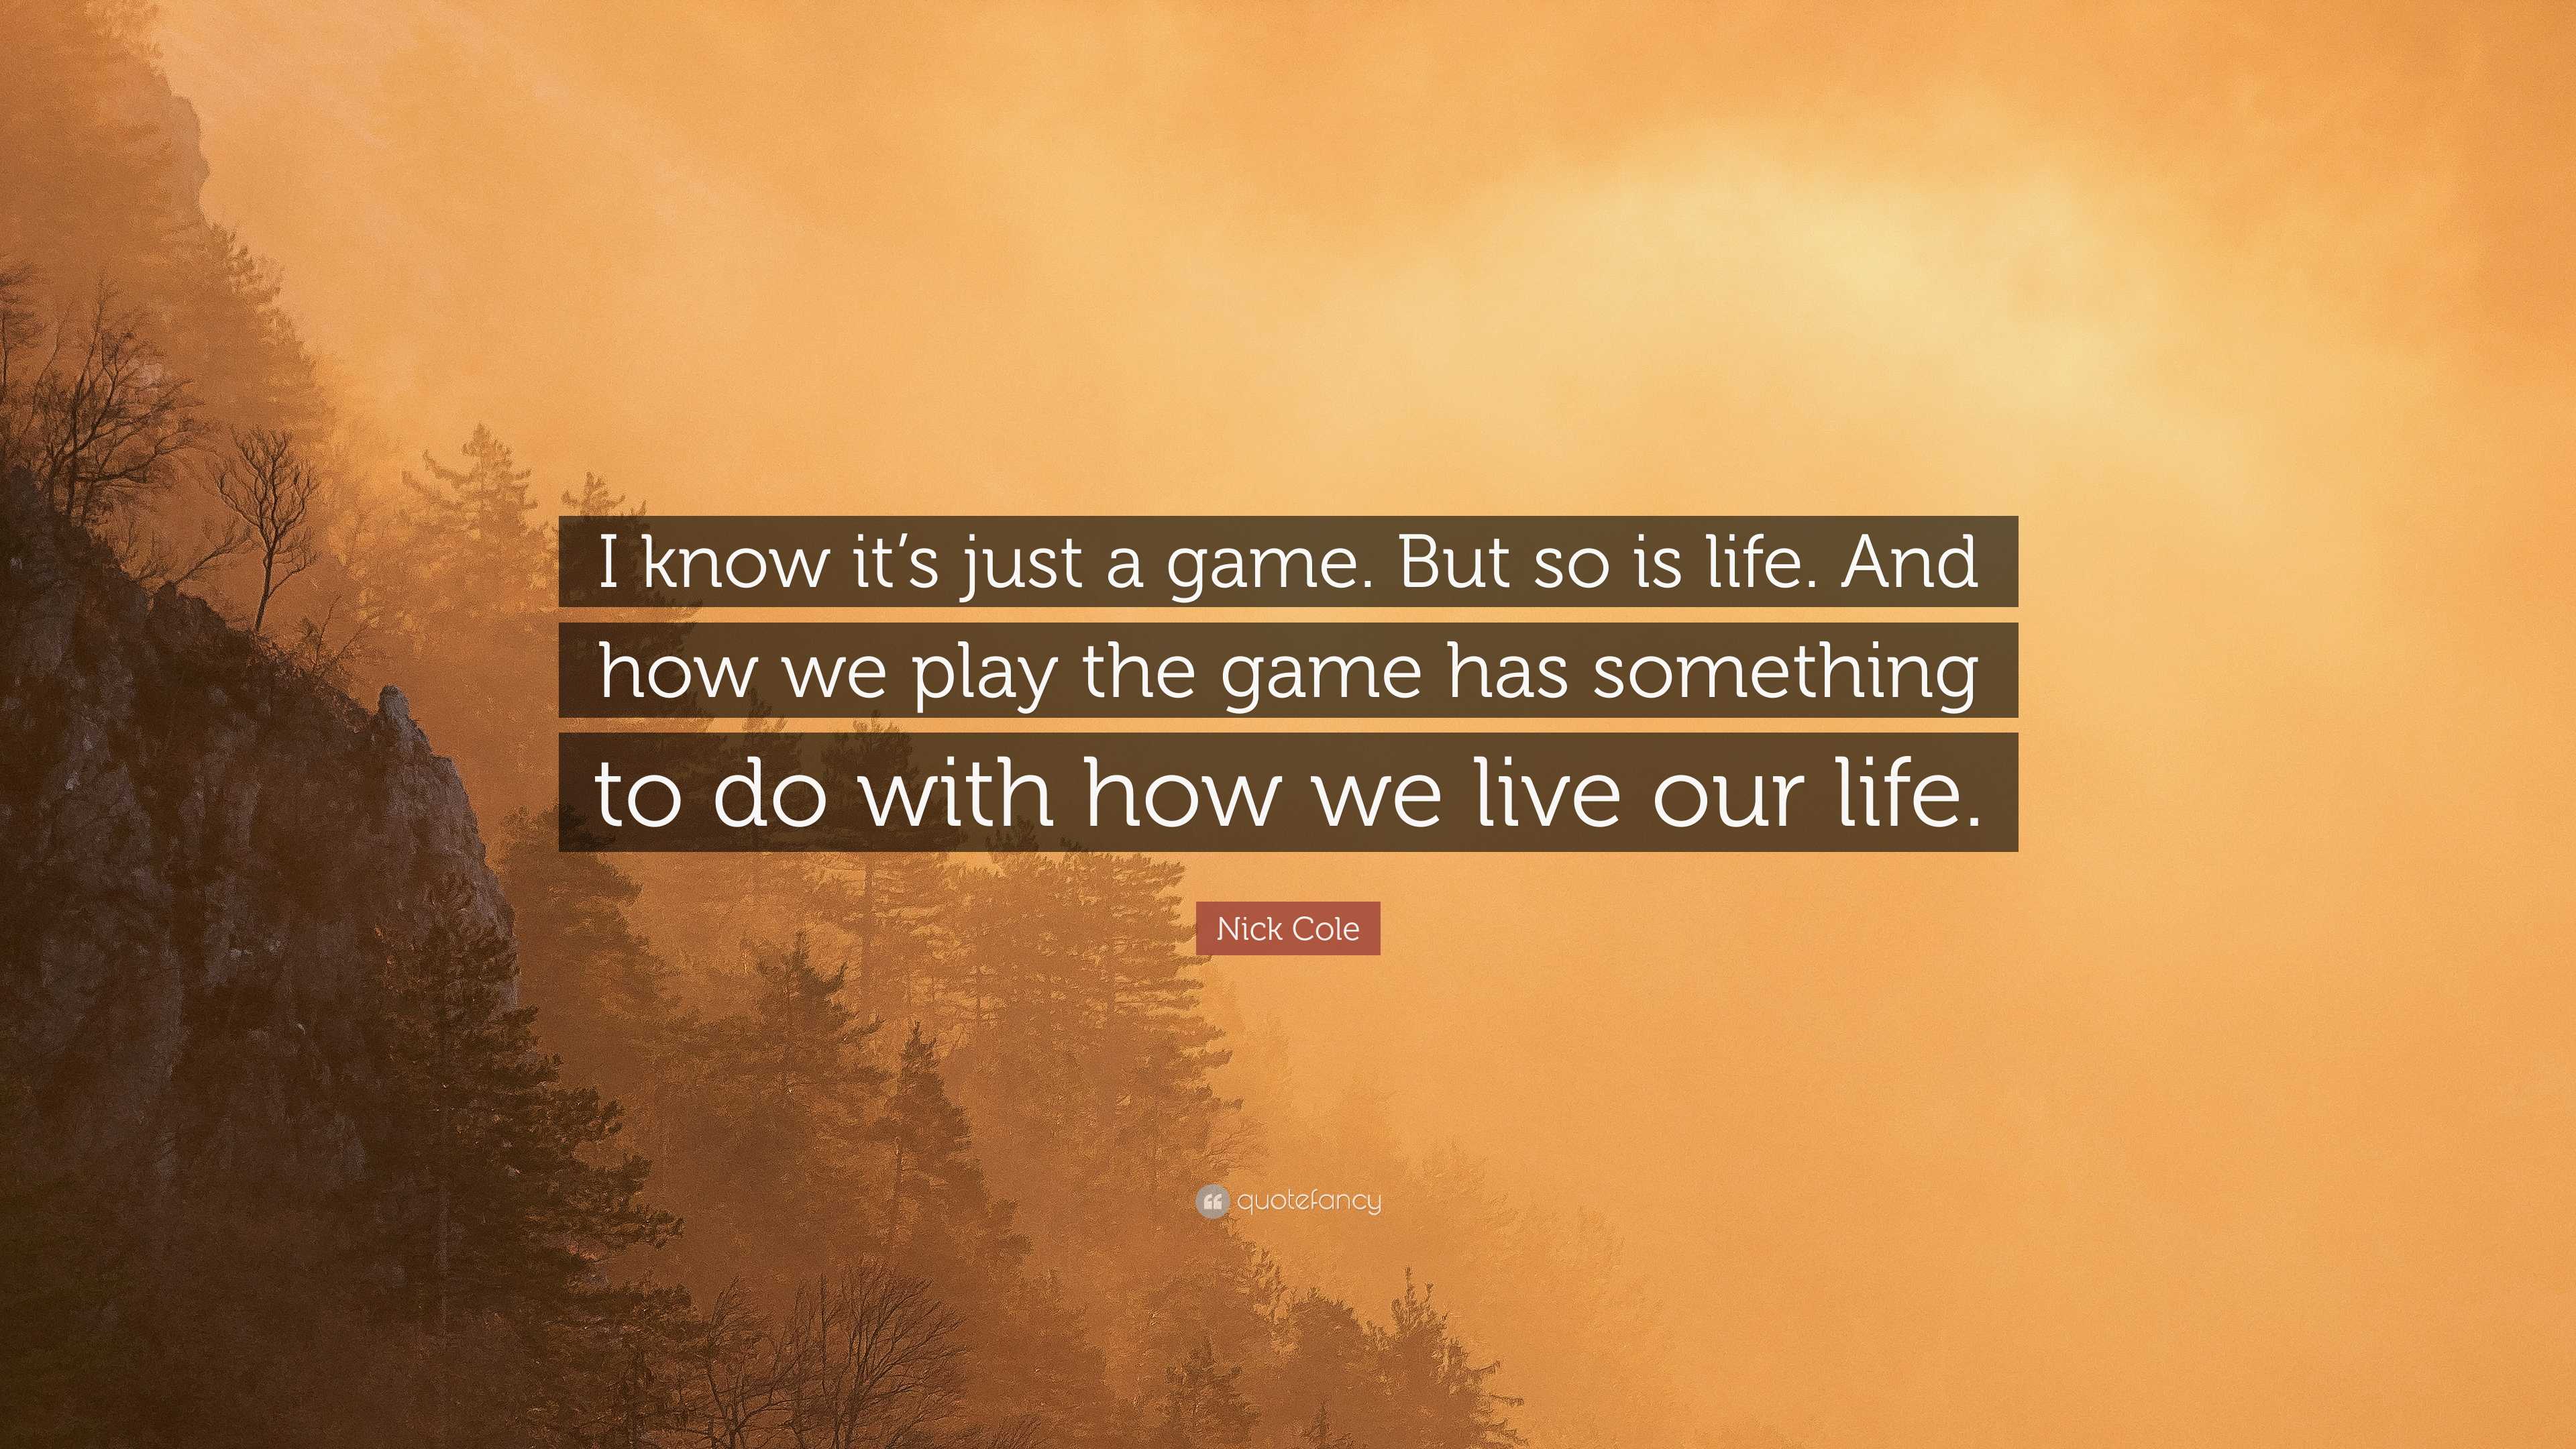 Nick Cole Quote: “I know it's just a game. But so is life. And how we